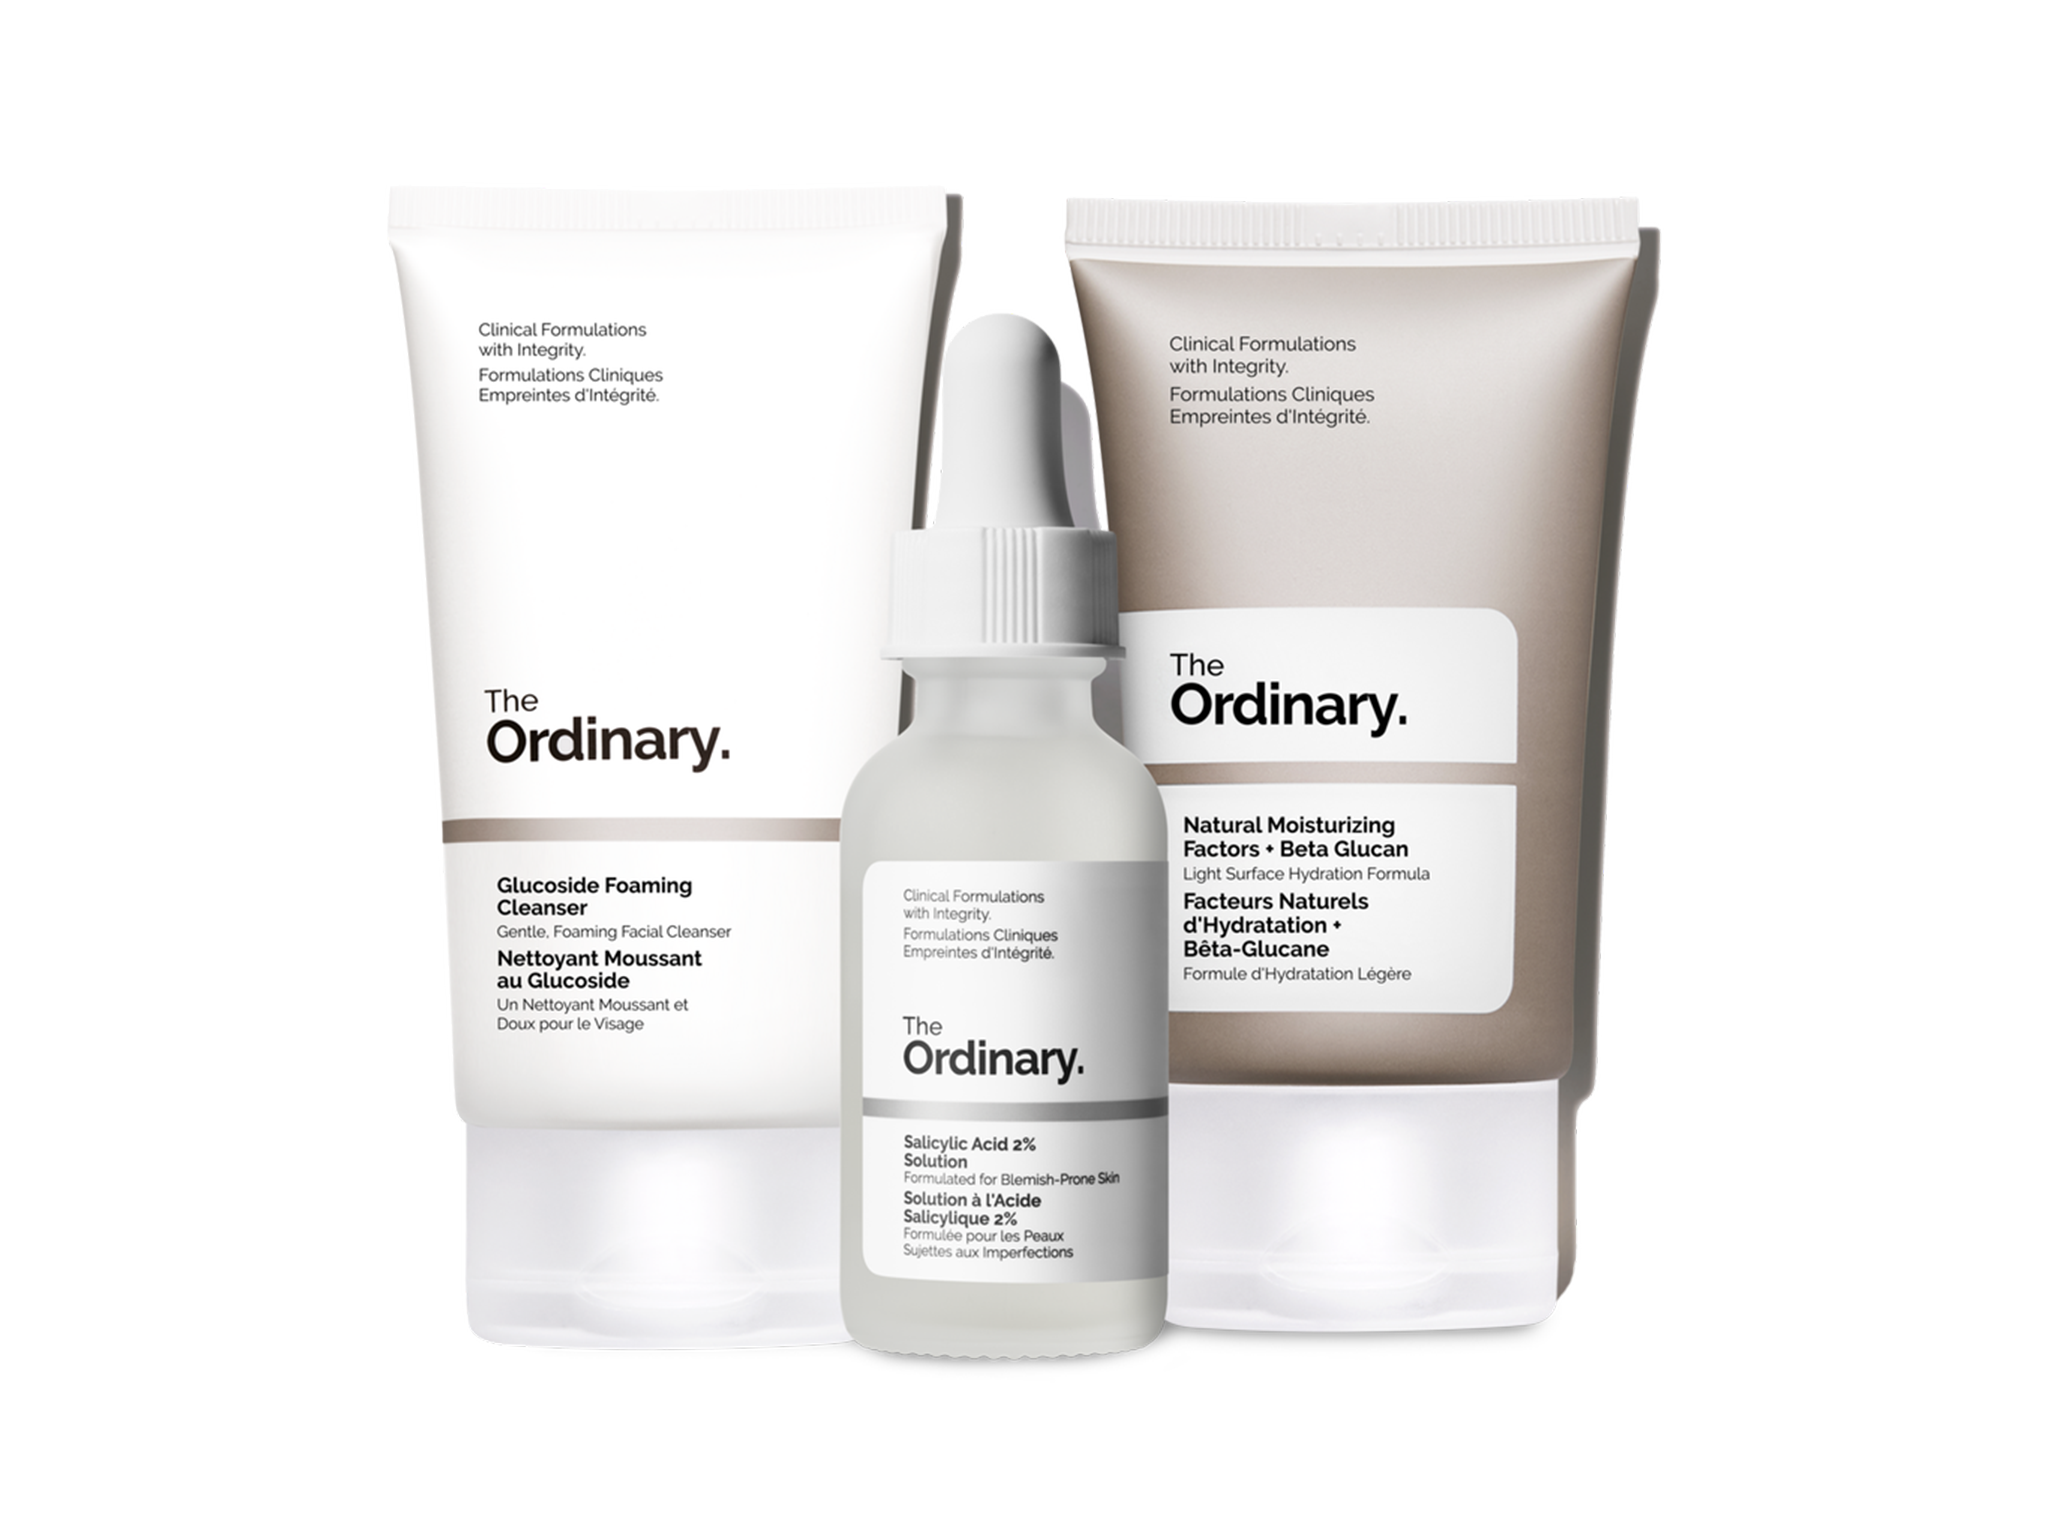 The Ordinary the clear set